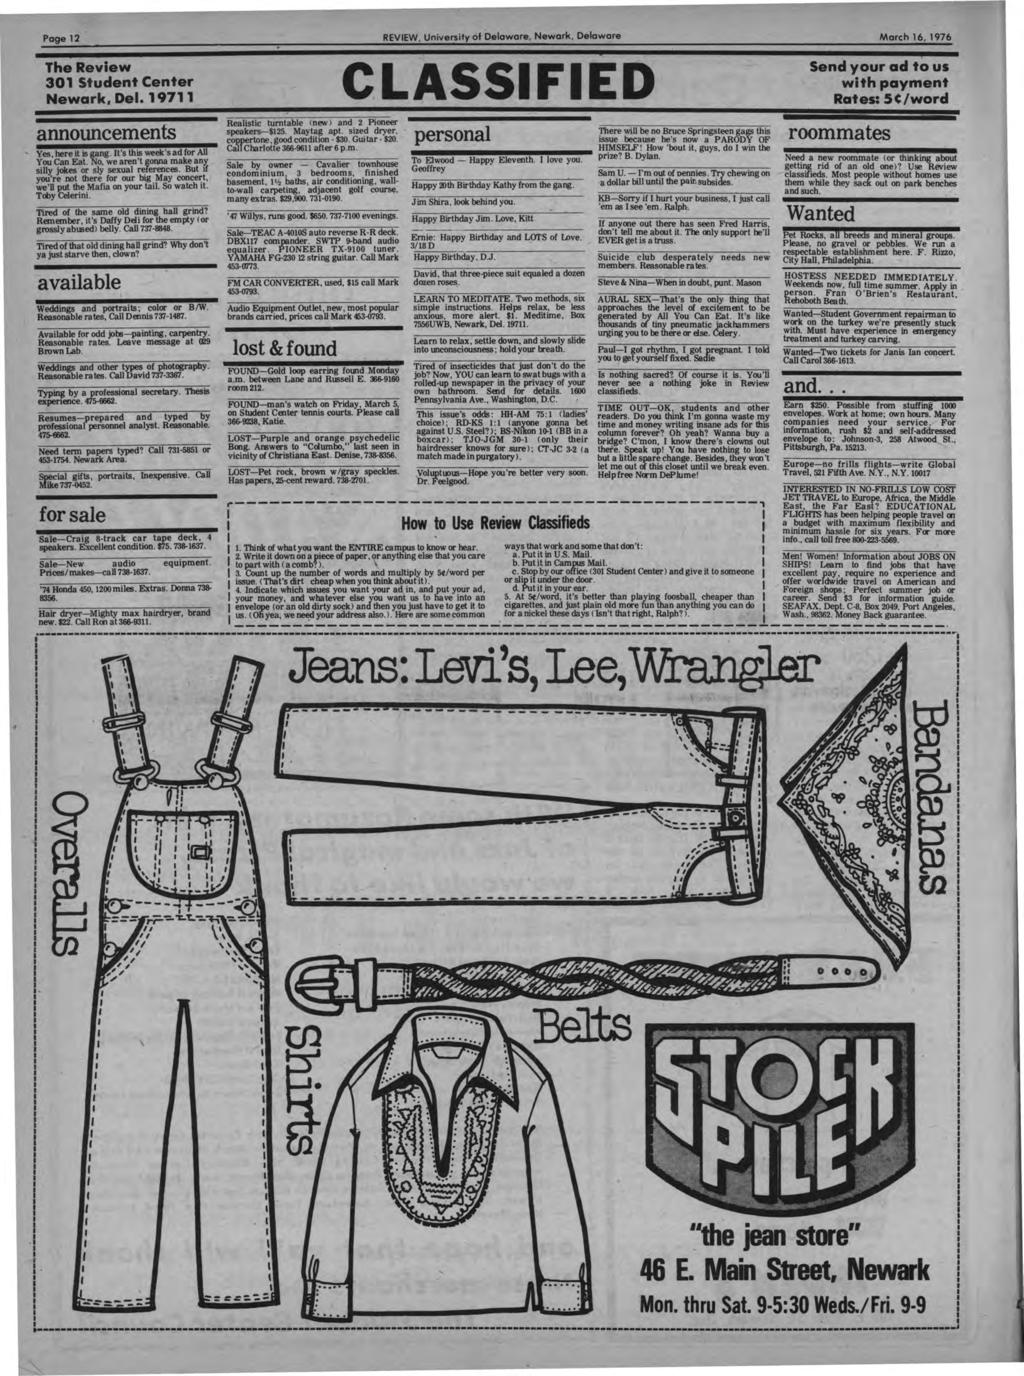 Page 12 The Review 301 Student Center Newark, Del. 19711 announcements, Yes, here it is gang. t's this week'sad for All you Can Eat. No, we aren't gonna make anx silly jokes or sly sexual references.